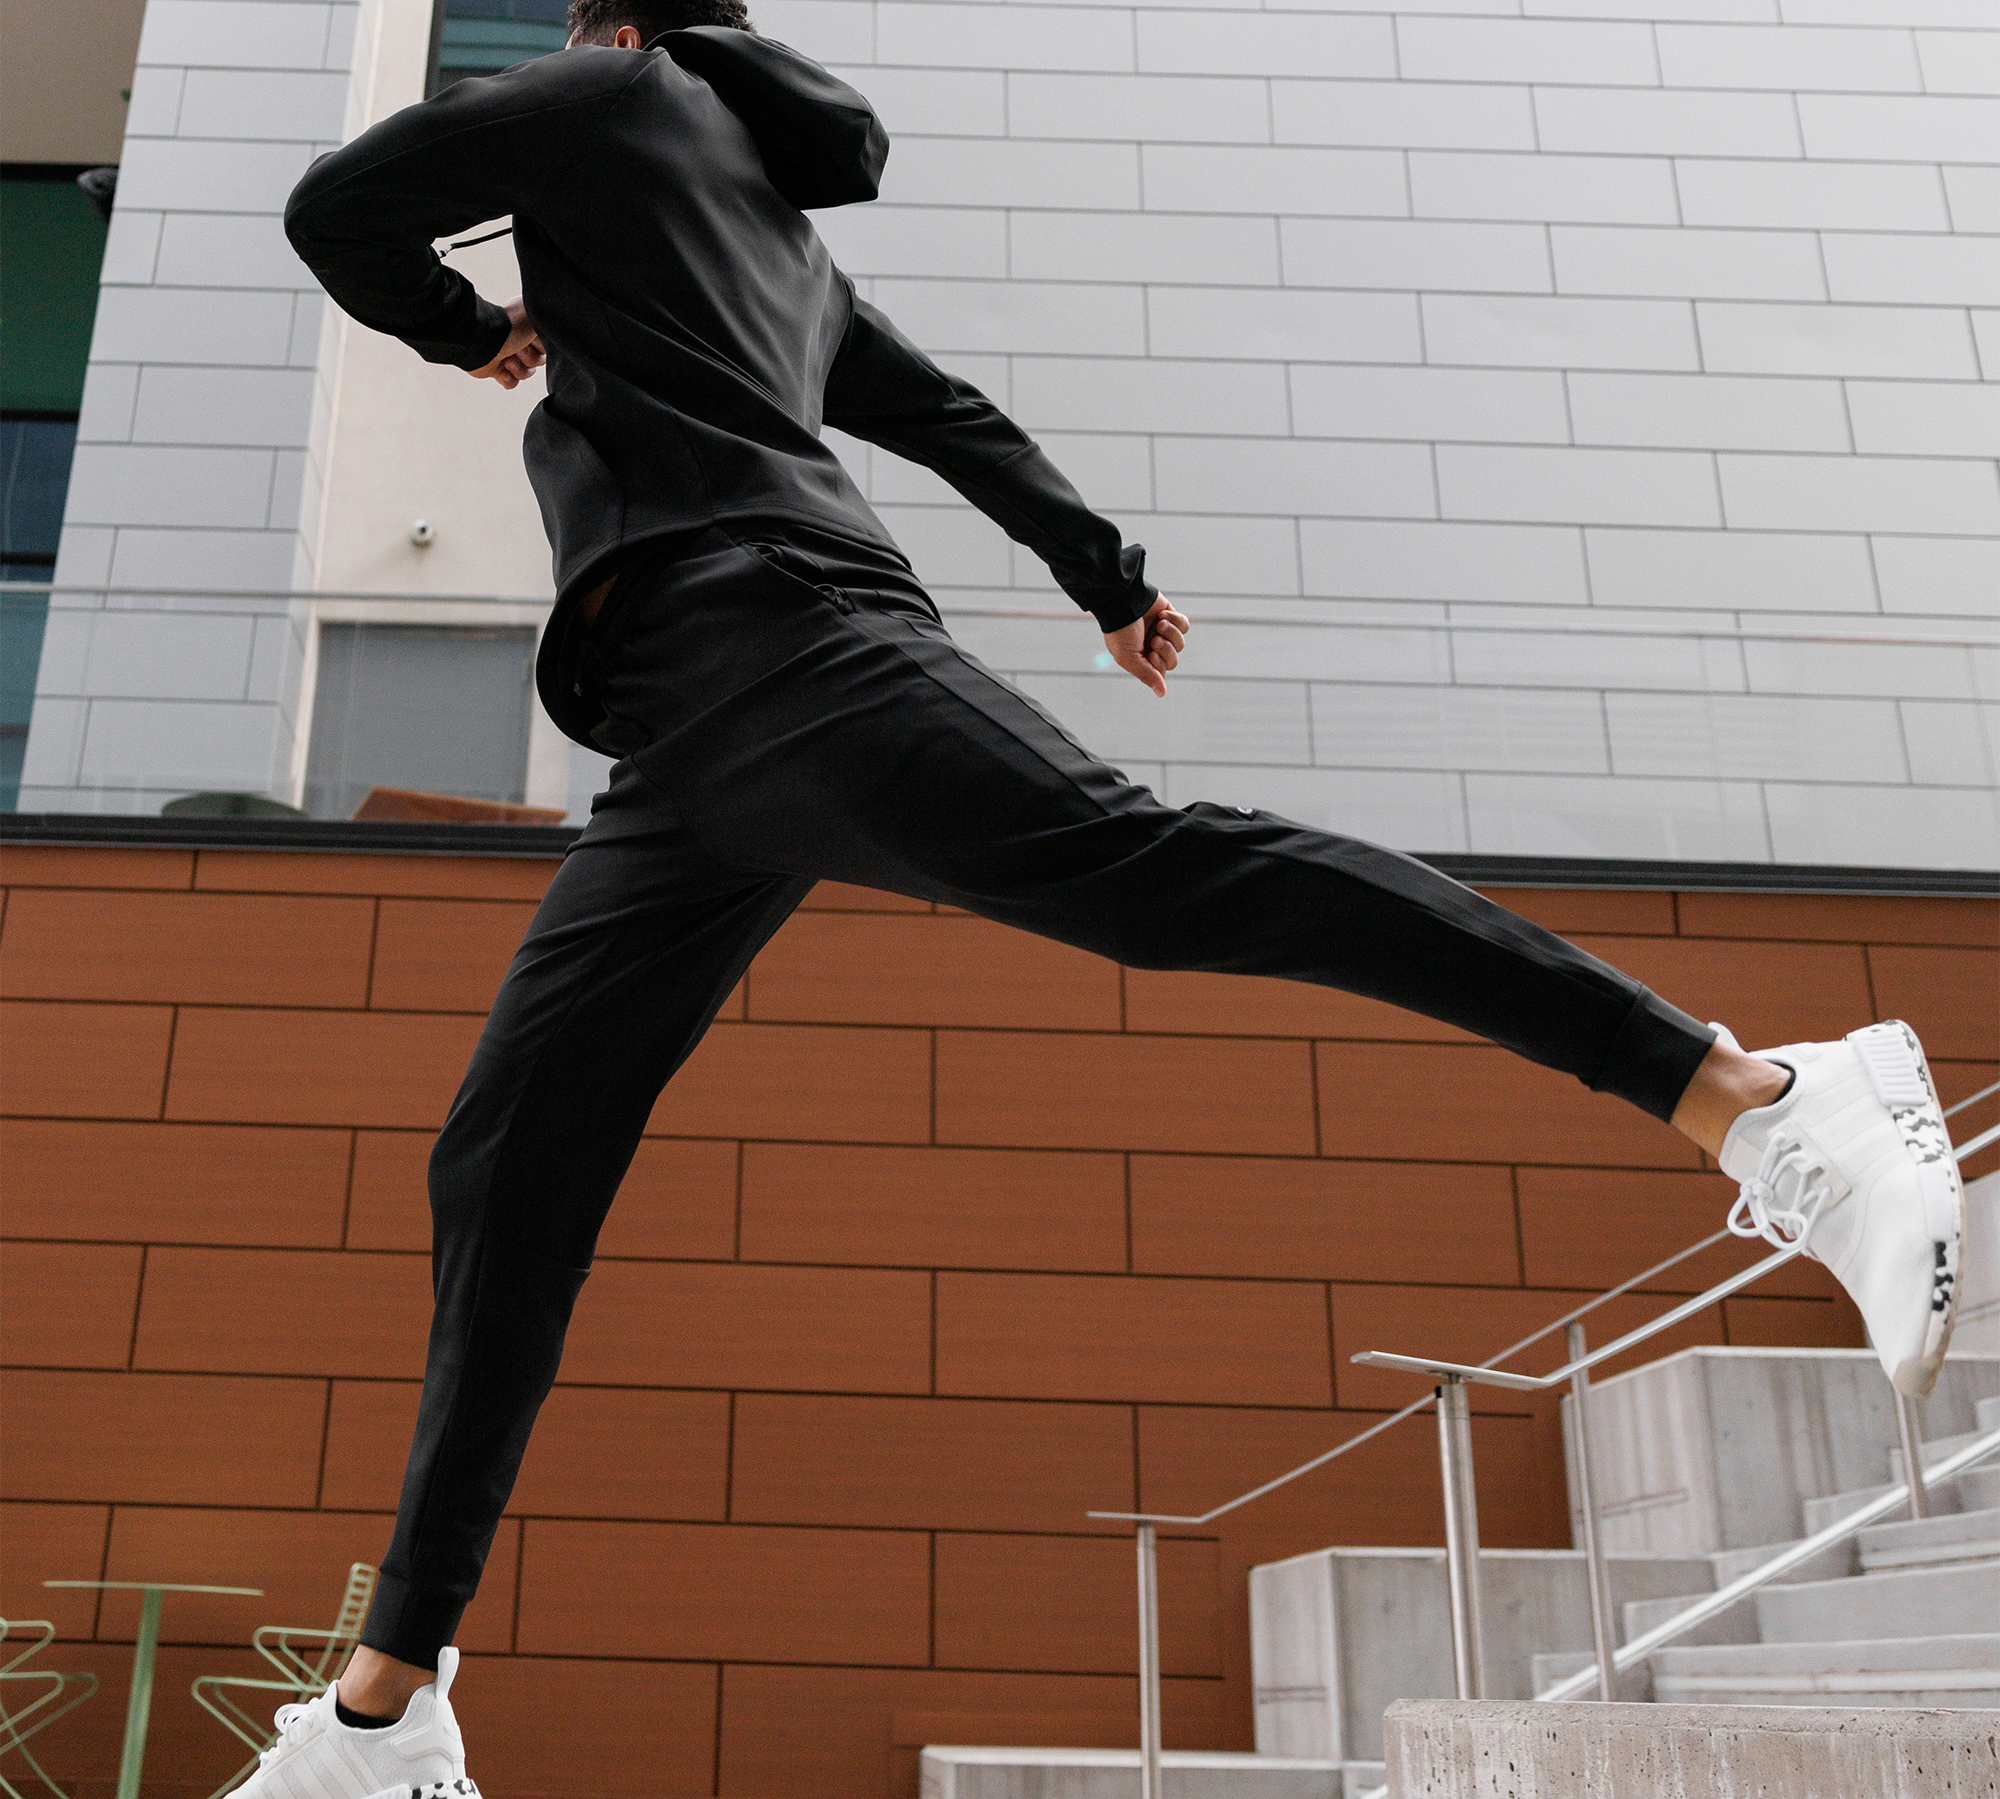 Man leaping down stairs wearing Ghostfit travel set.